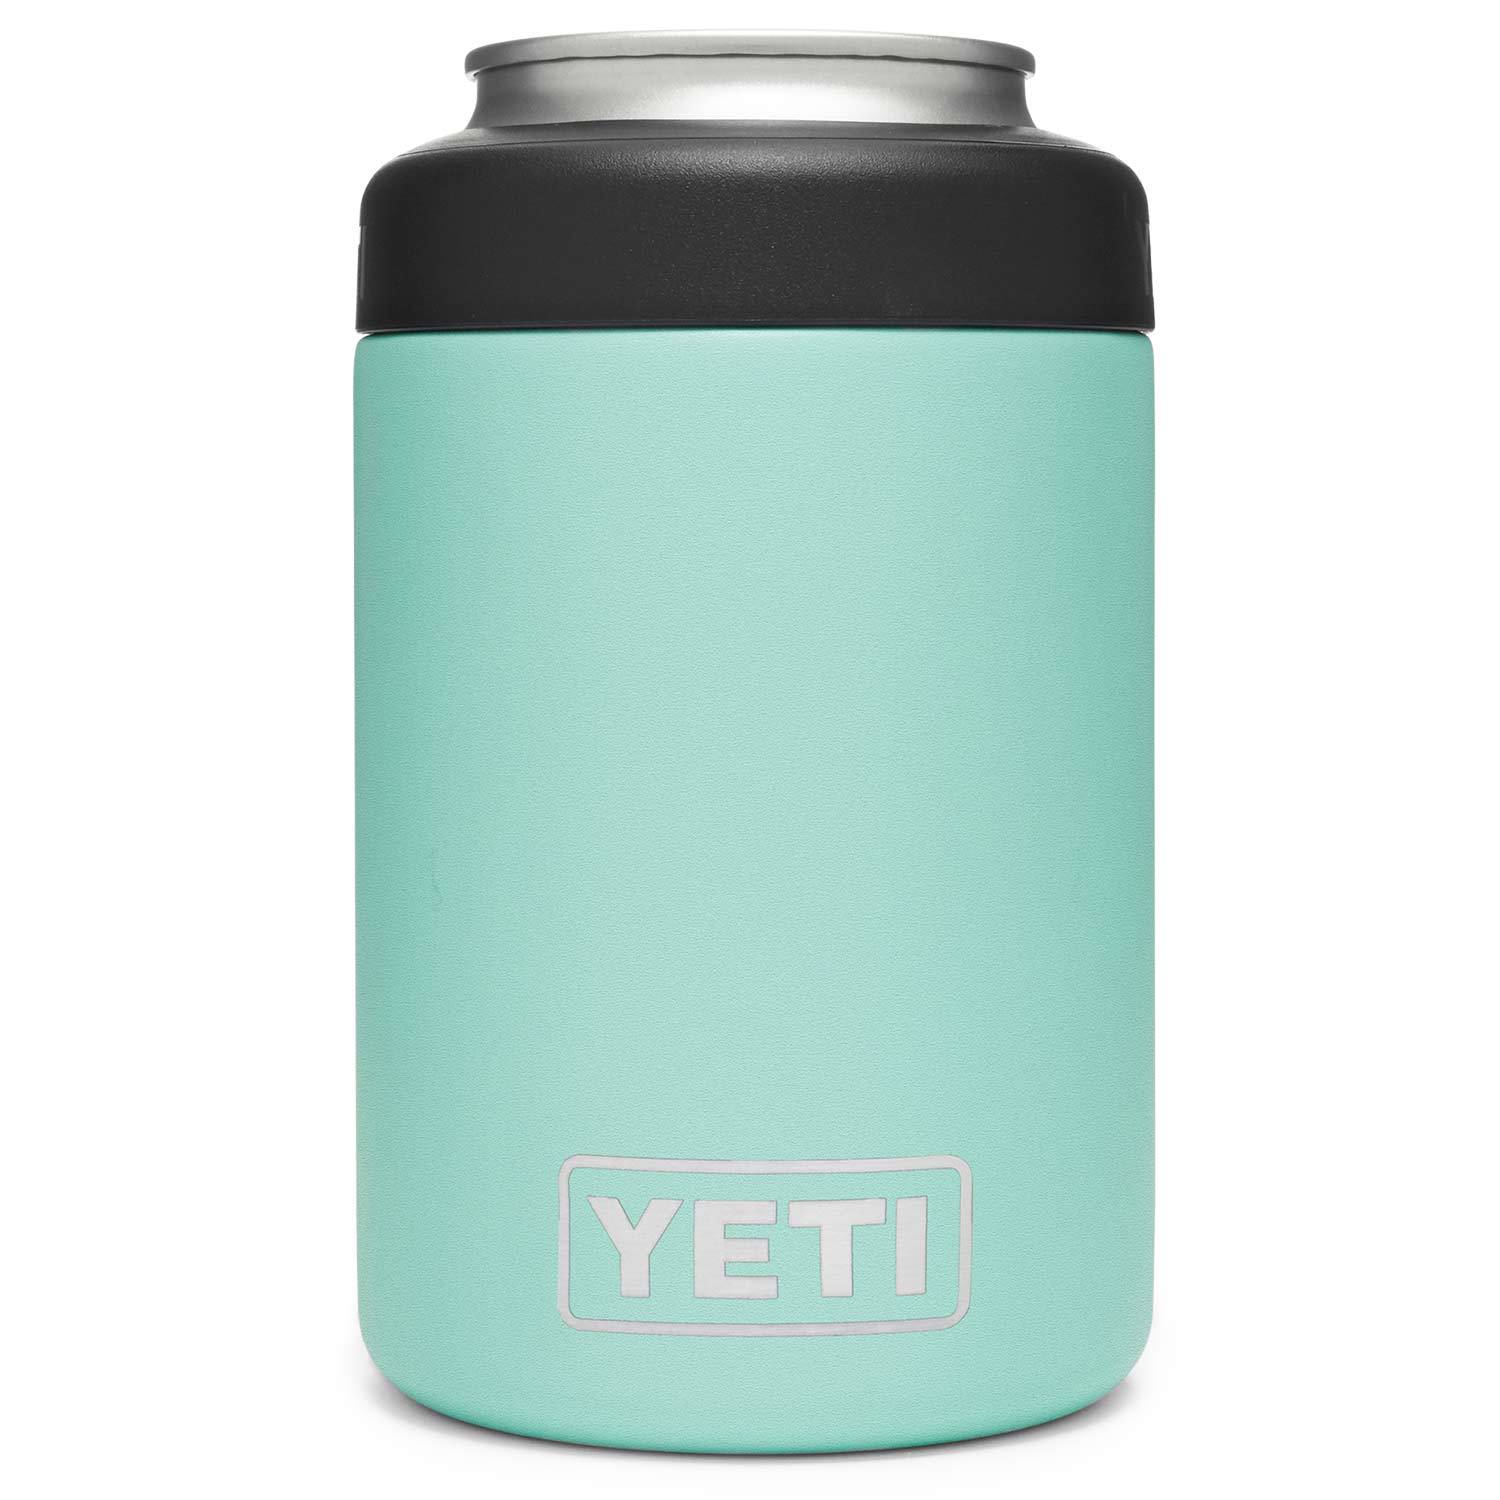 Yeti Rambler 12 Oz Colster Can Cooler - The Compleat Angler